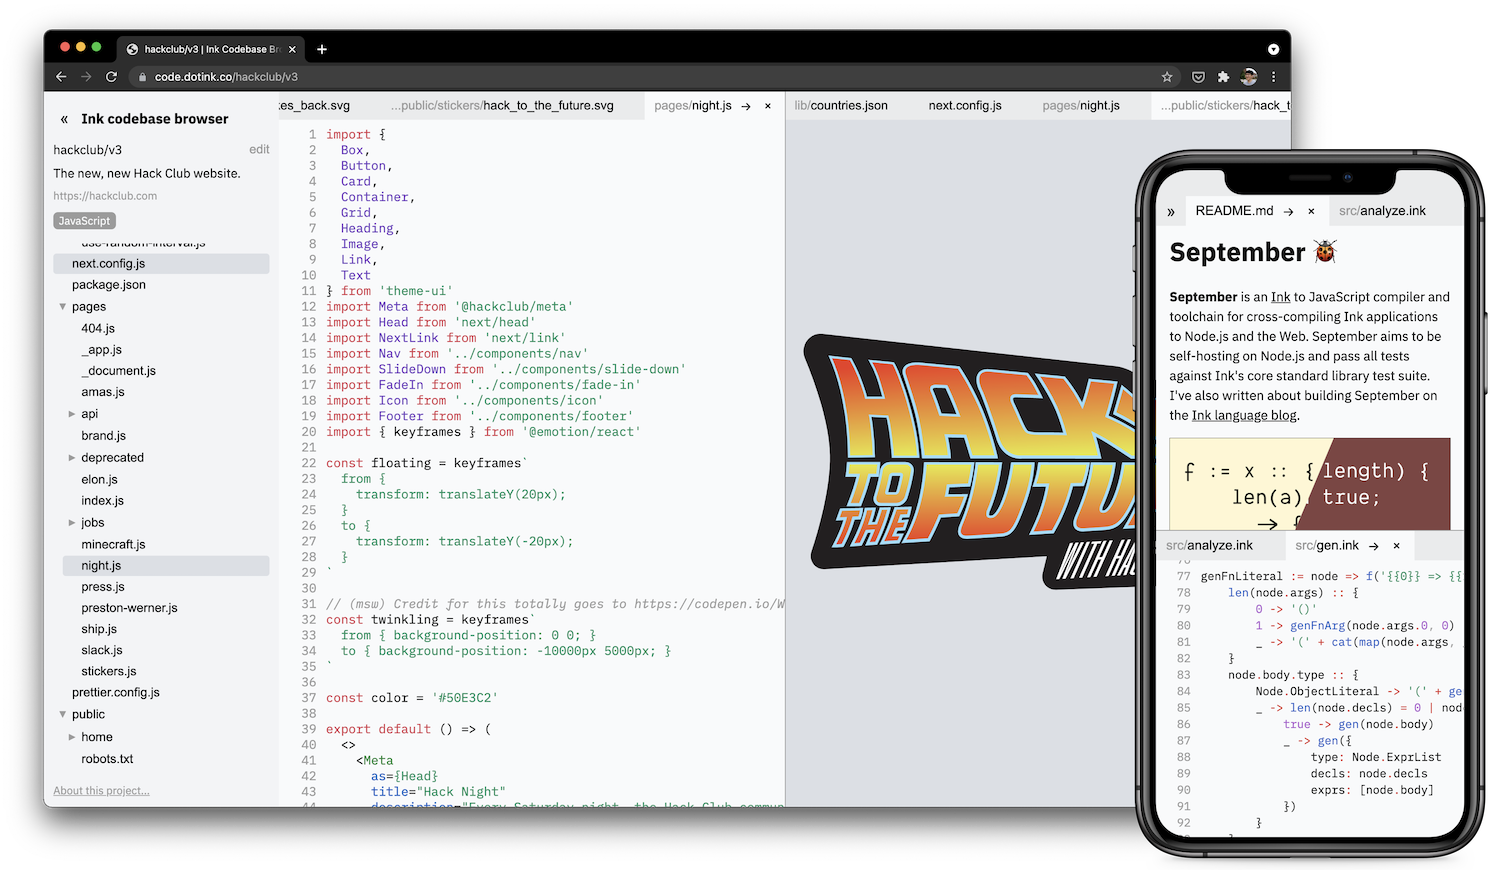 Screenshots of Ink codebase browser running on a browser window and an iPhone